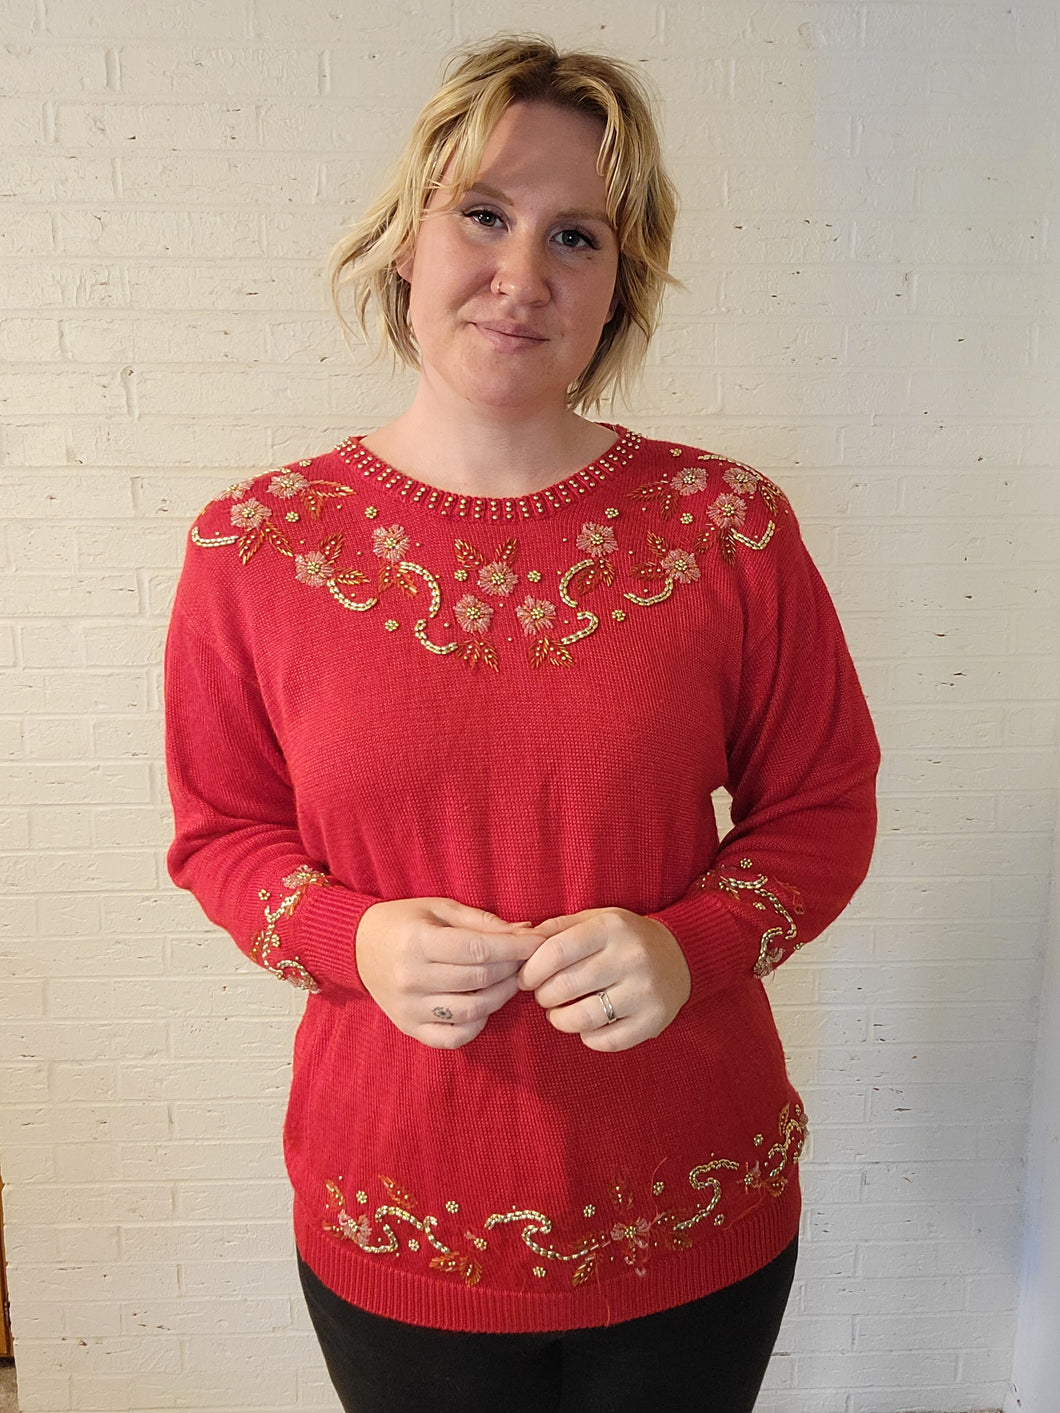 up to 2X - Red and Gold Beaded Sweater